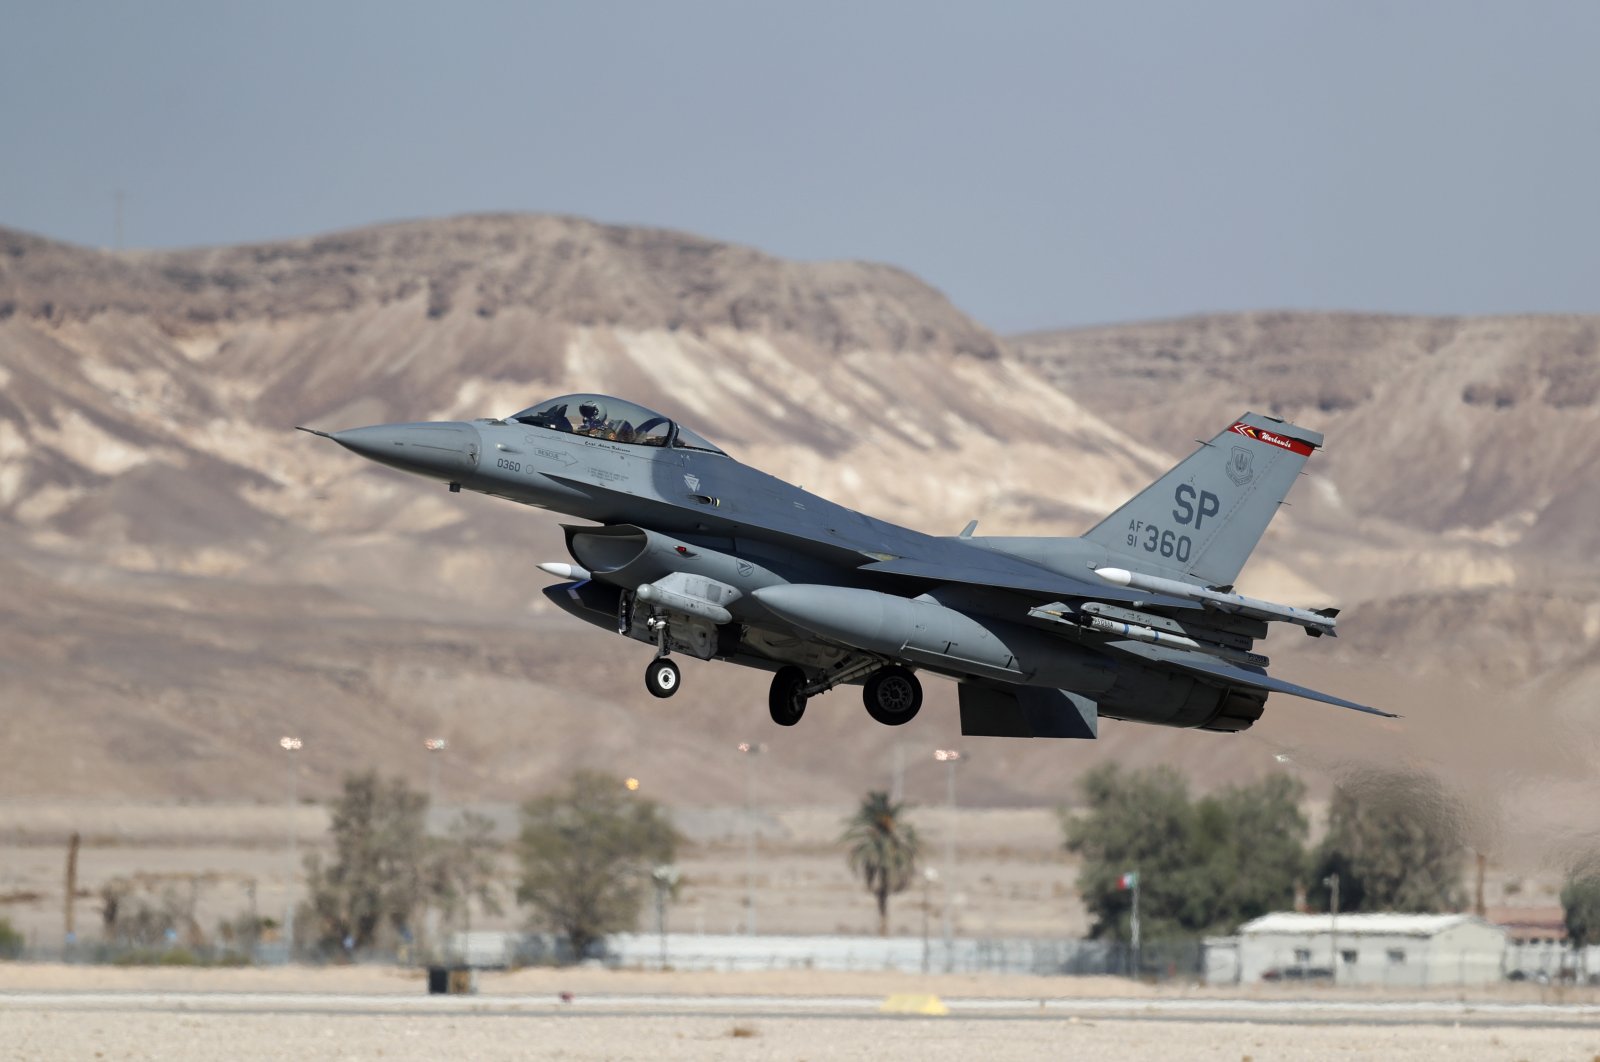 A U.S. F-16 aircraft takes off during the "Blue Flag" multinational air defense exercise at the Ovda air force base, north of the Israeli city of Eilat, Oct. 24, 2021. (EPA Photo)